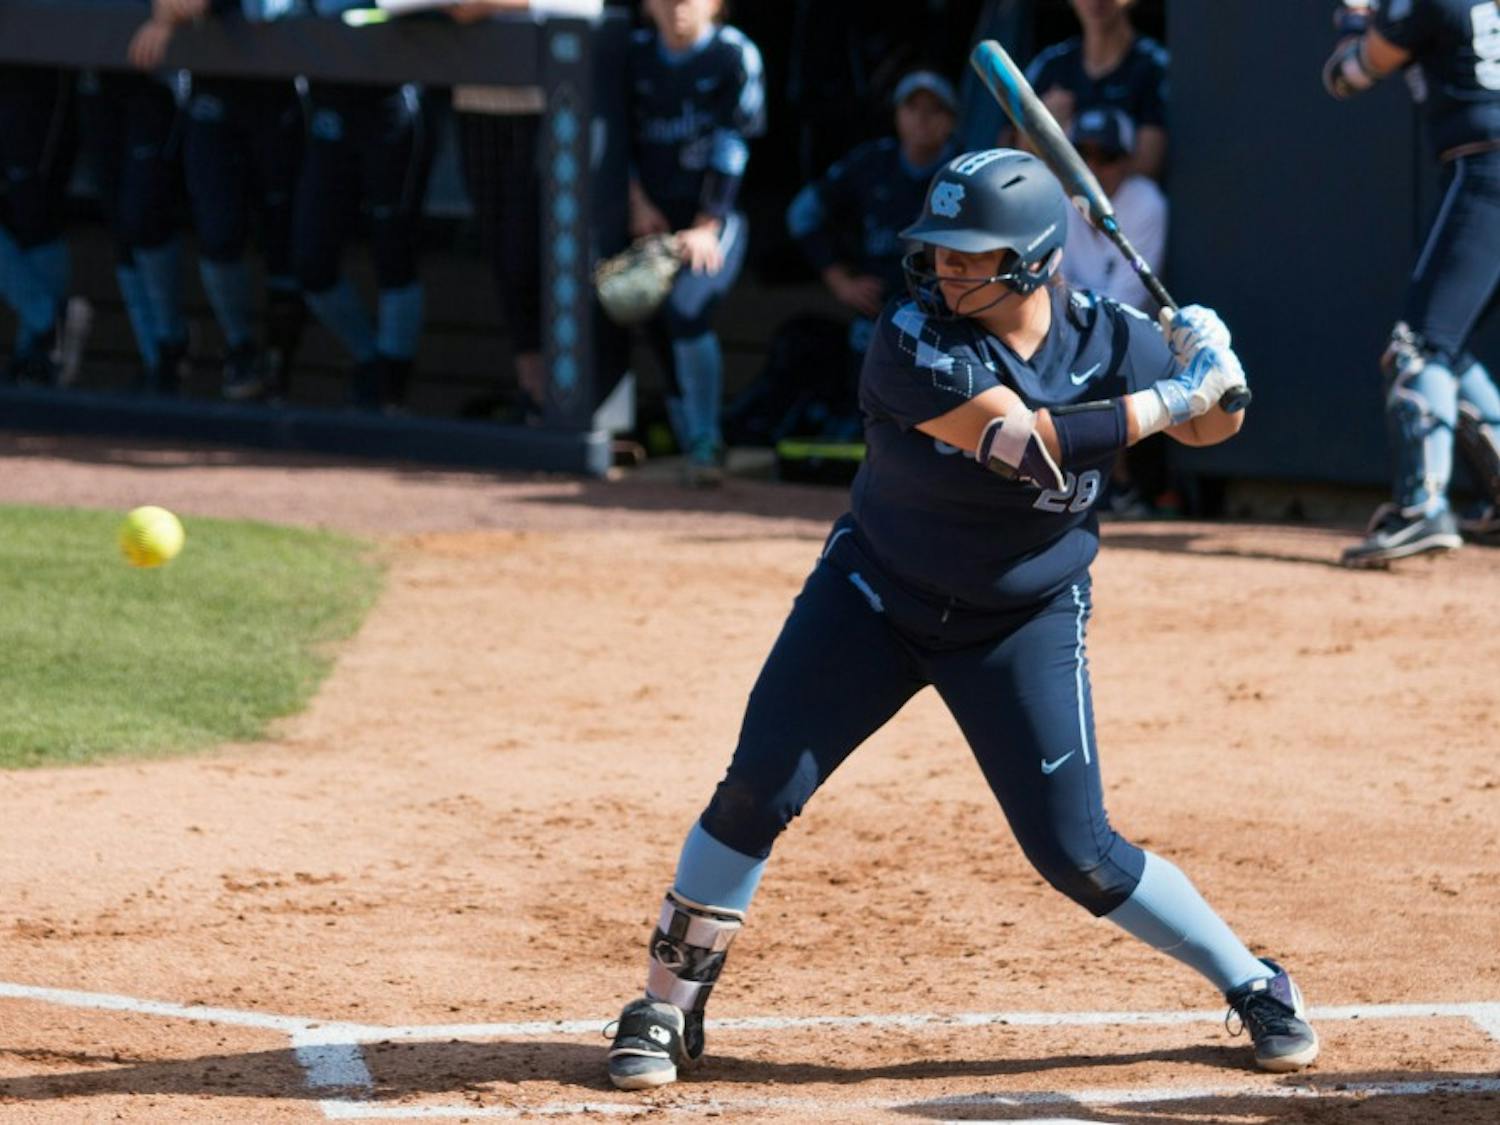 UNC junior pitcher Brittany Pickett (28) bats during a double header against the FSU Seminoles at G. Anderson Softball Stadium on Monday, April 15, 2019. The Tar Heels beat the Seminoles in both games.